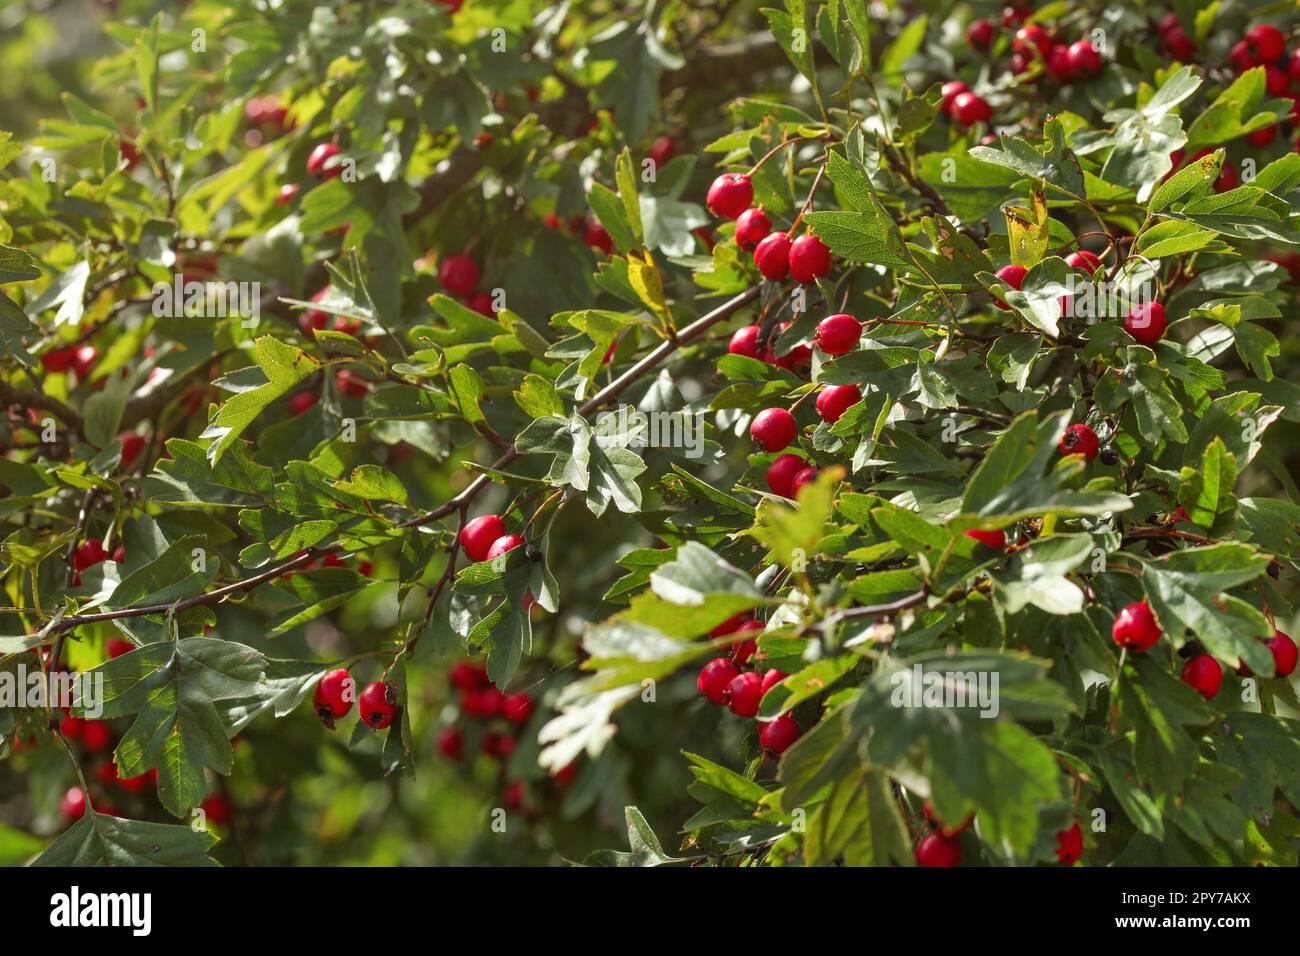 Hawthorn (Crataegus / hawberry) bush with small red fruits. Stock Photo